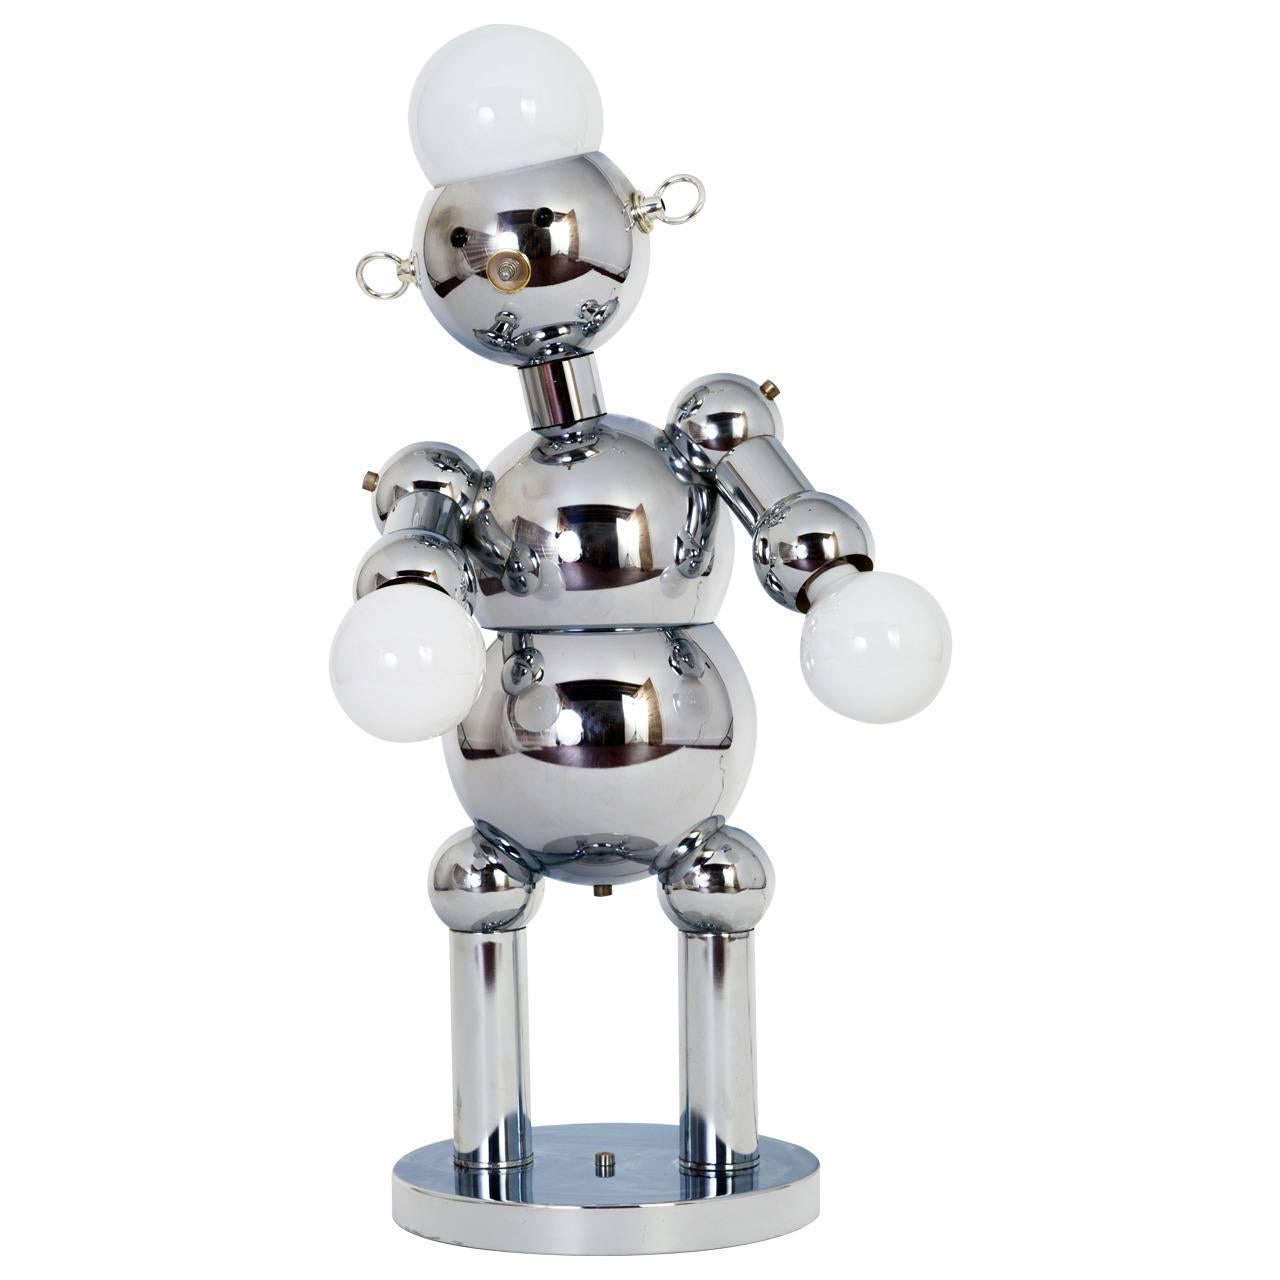 Space Age Italian Robot Table Lamp in Chrome by Torino